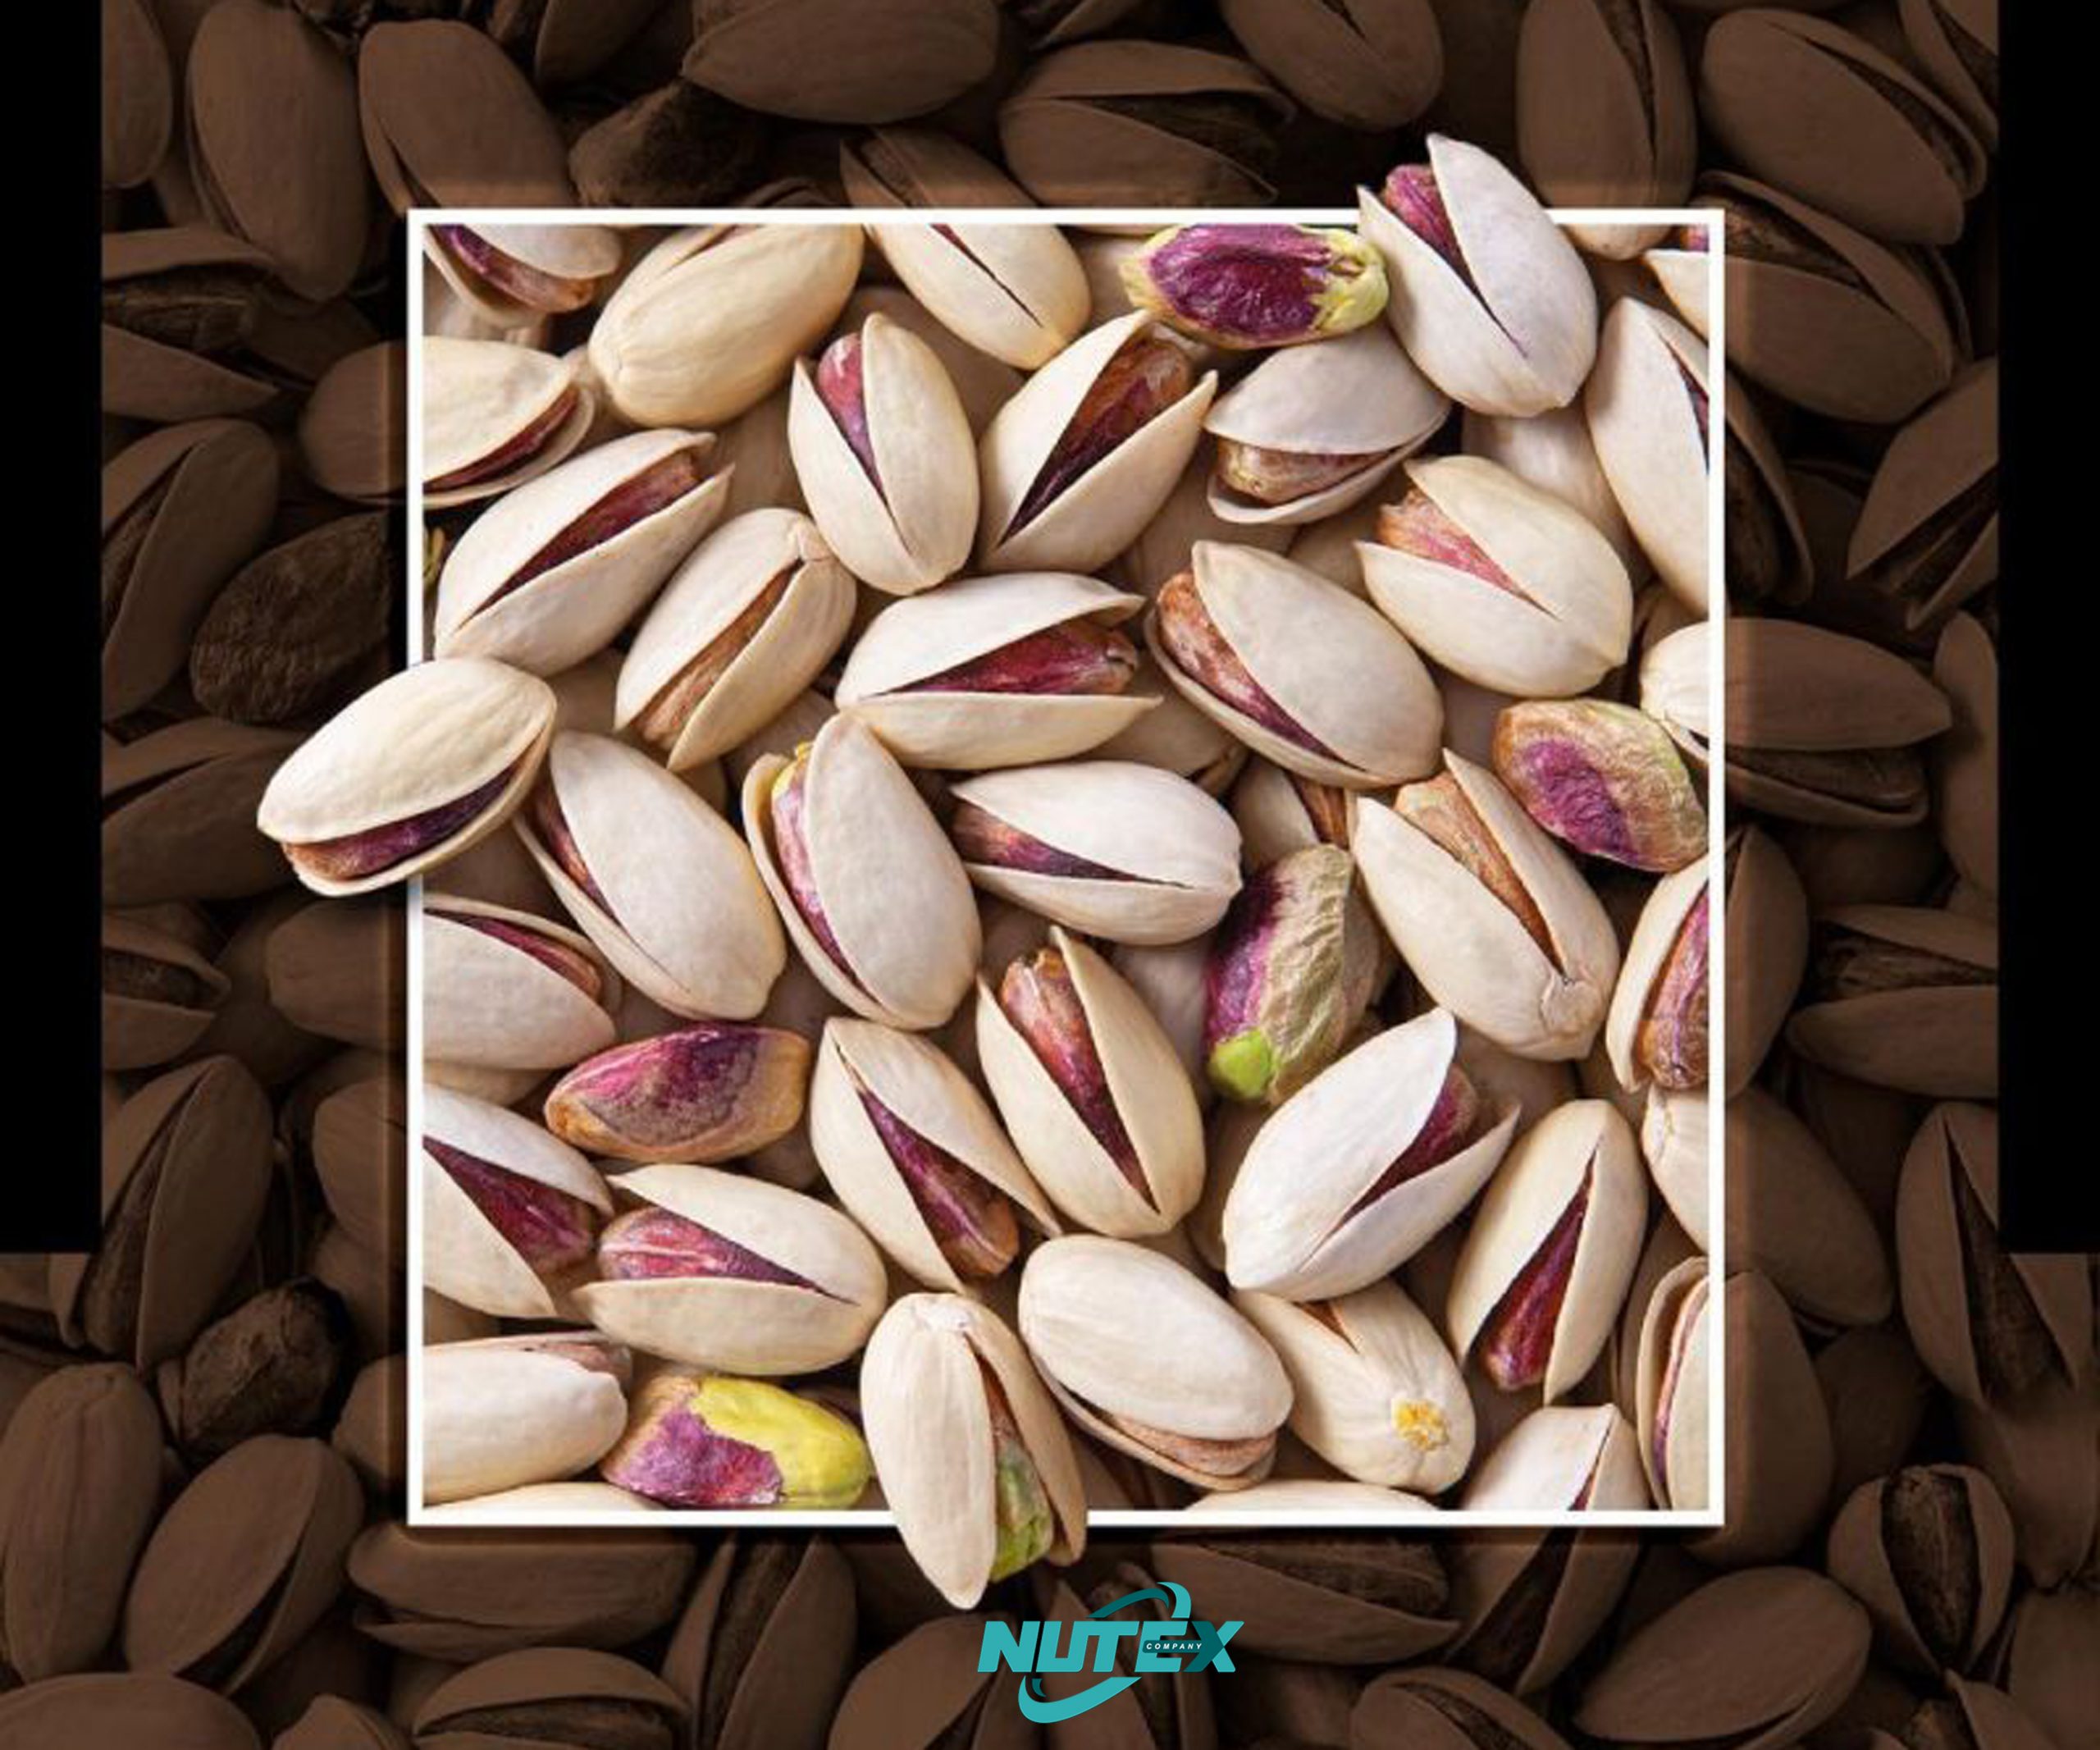 The Best Pistachio Suppliers in Iran - Nutex Company